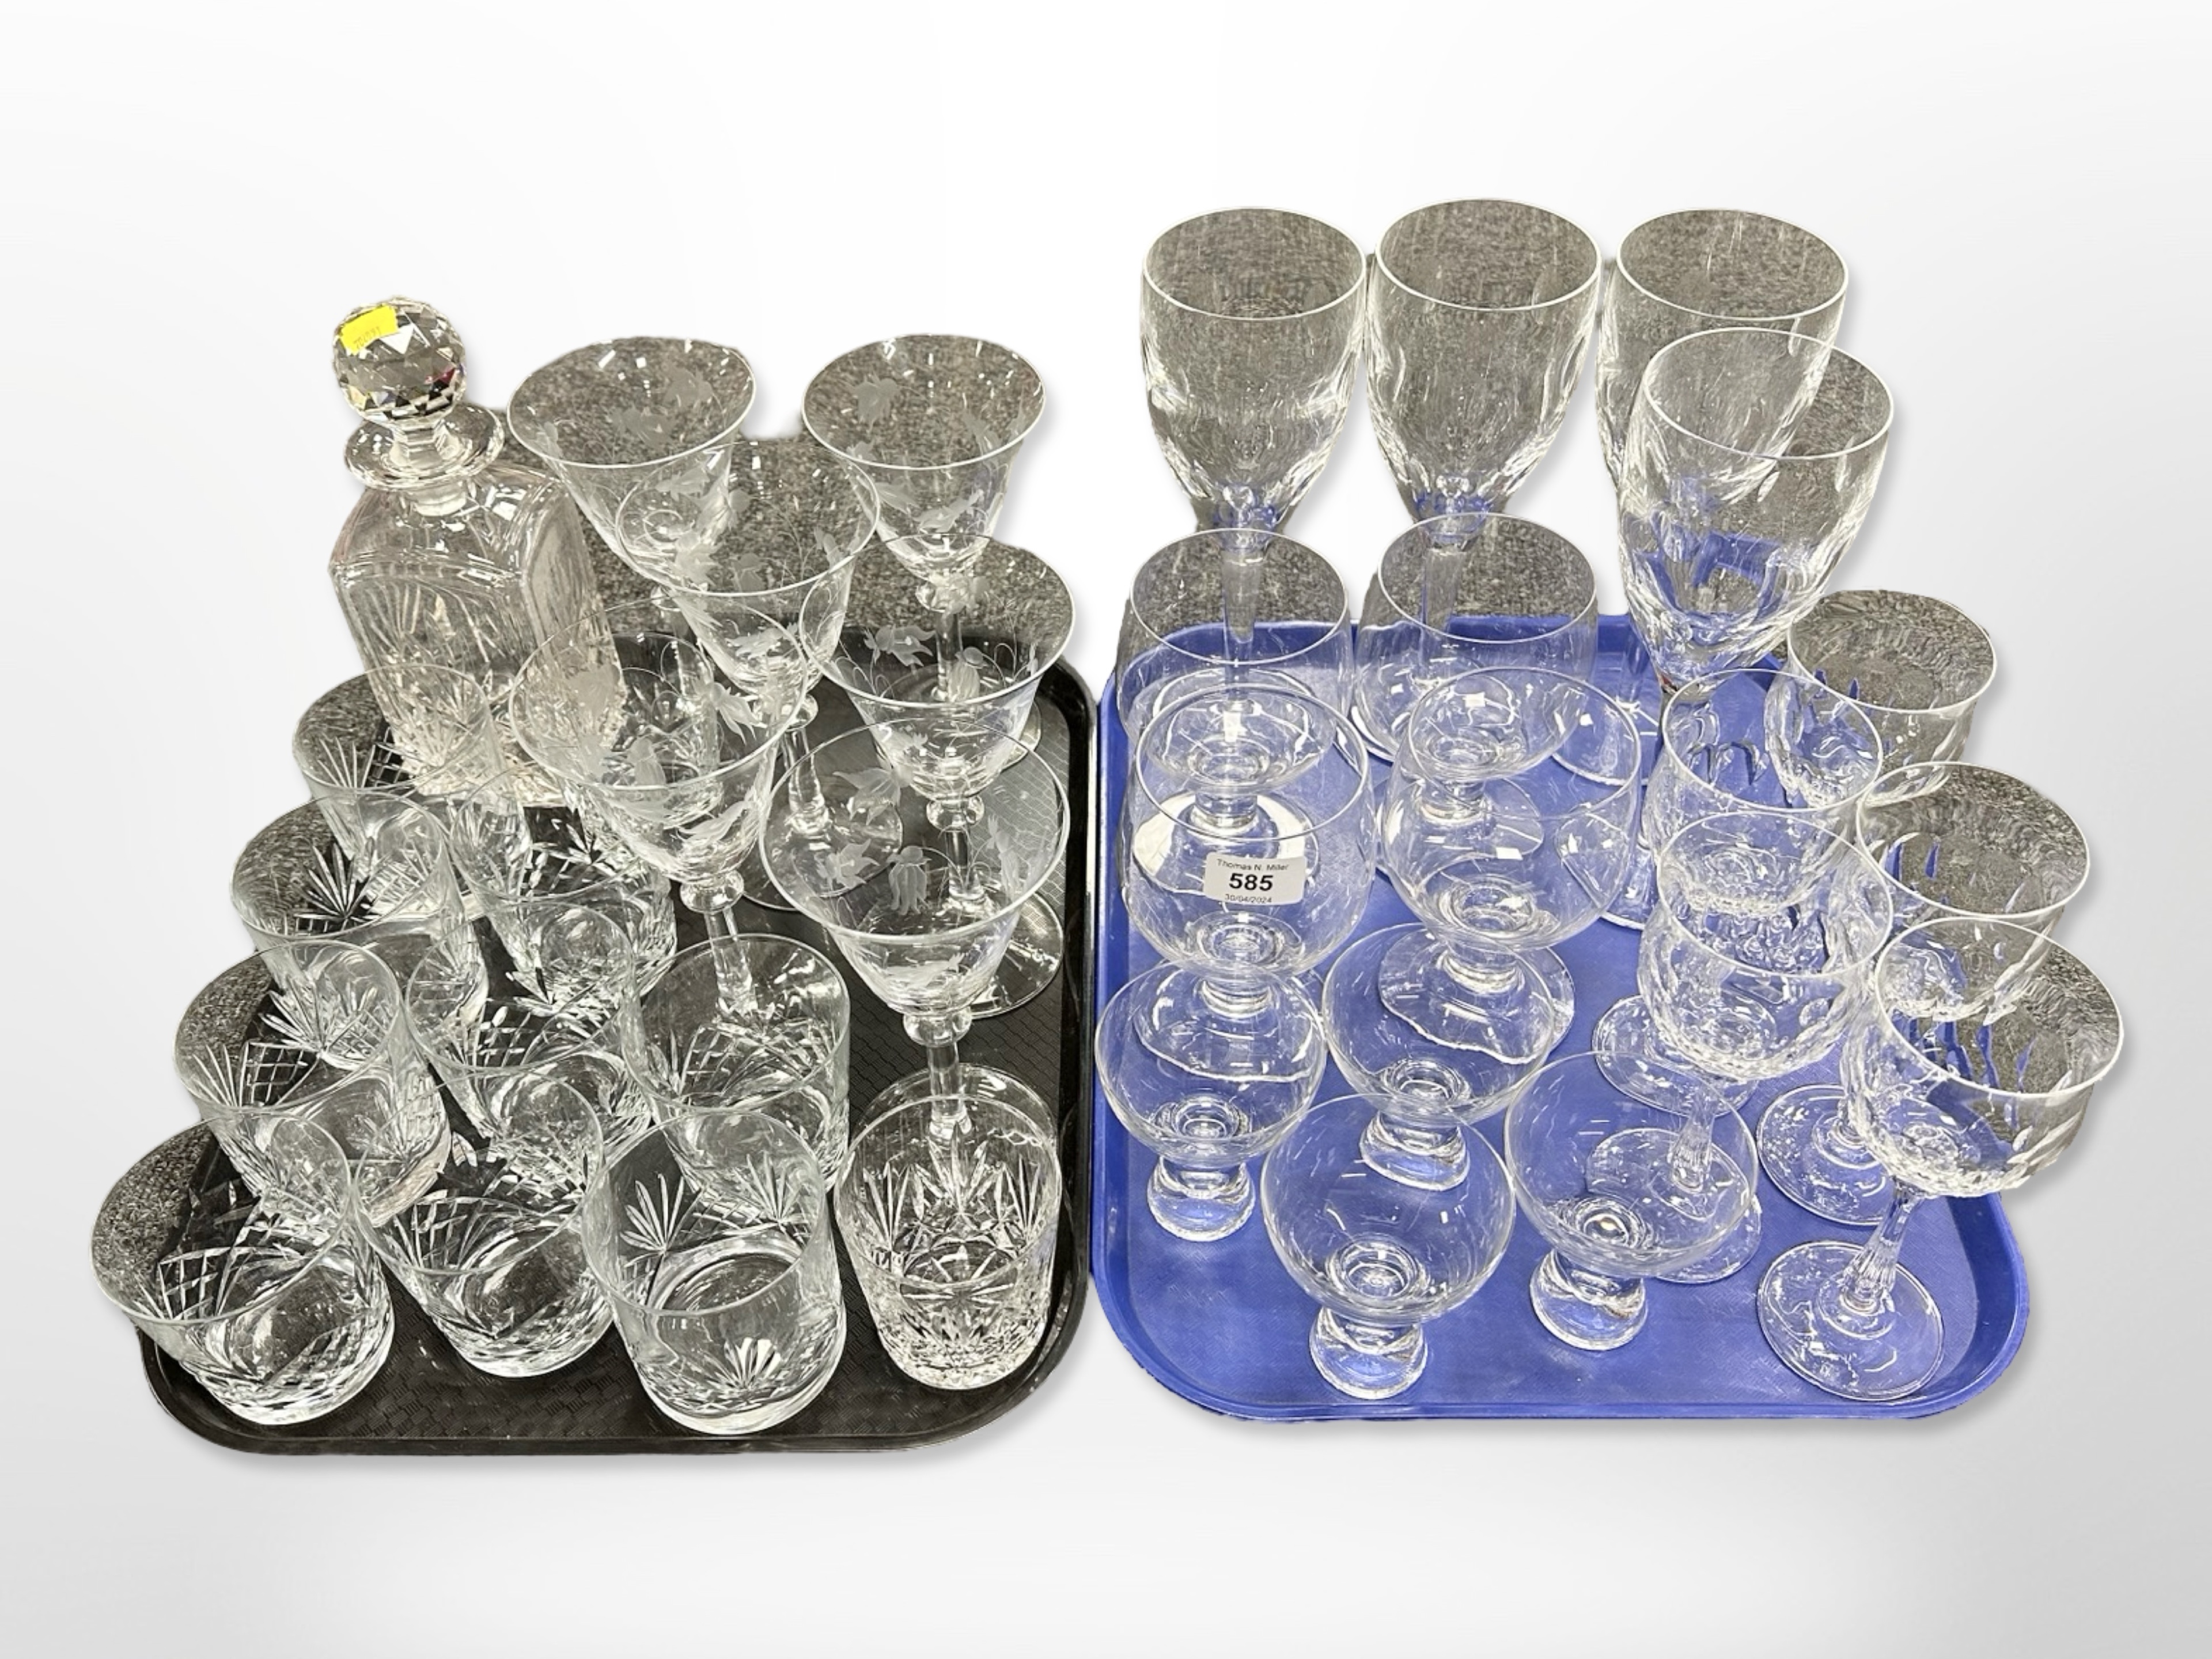 A collection of 20th-century drinking glasses including large wine glasses, tumblers,